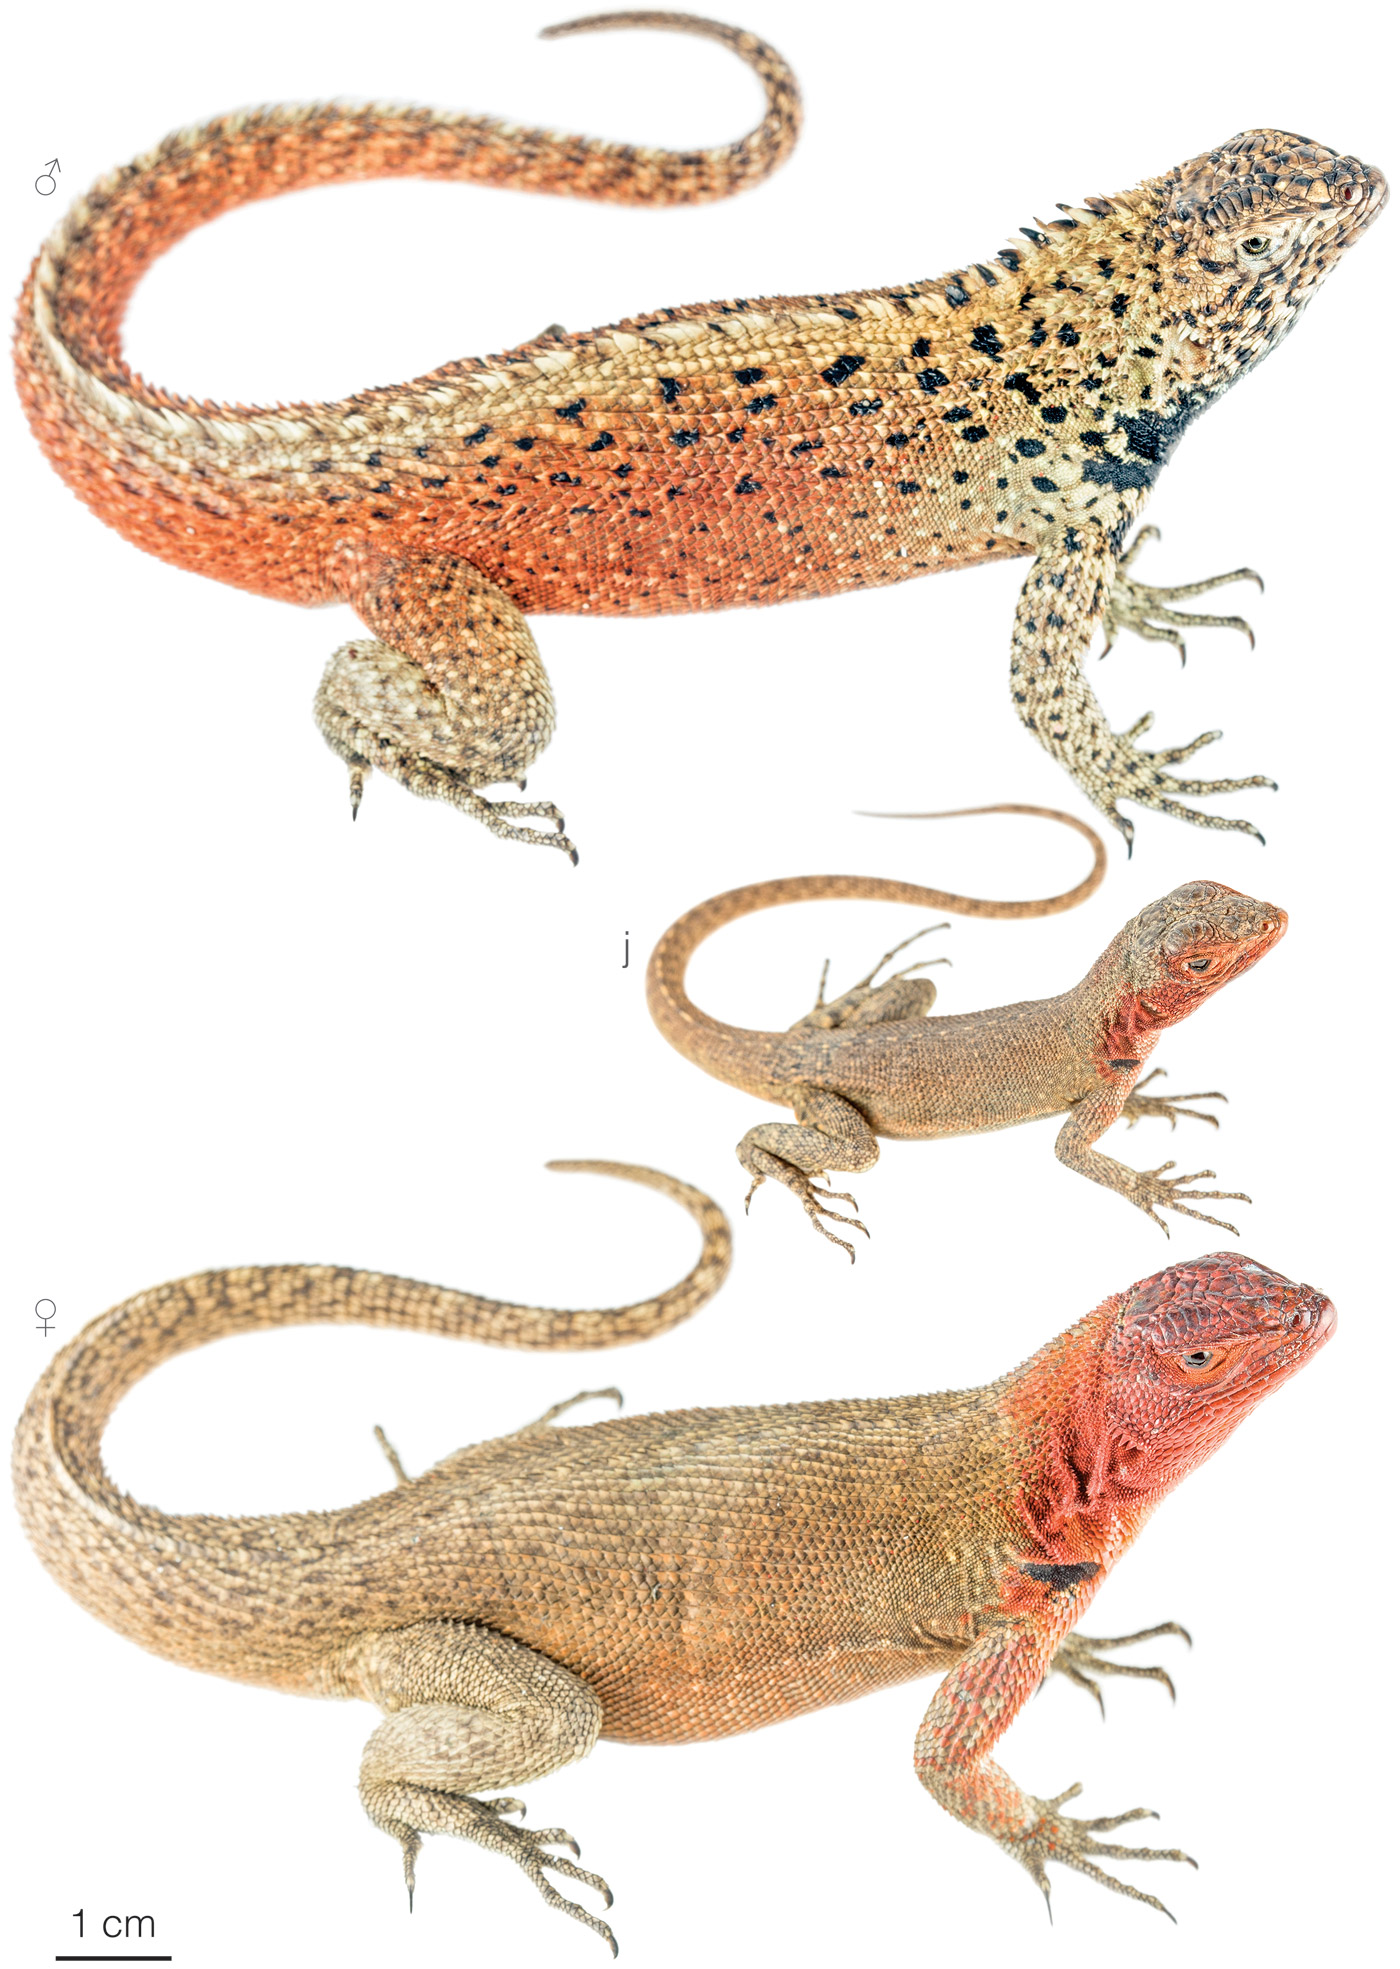 Figure showing variation among individuals of Microlophus delanonis